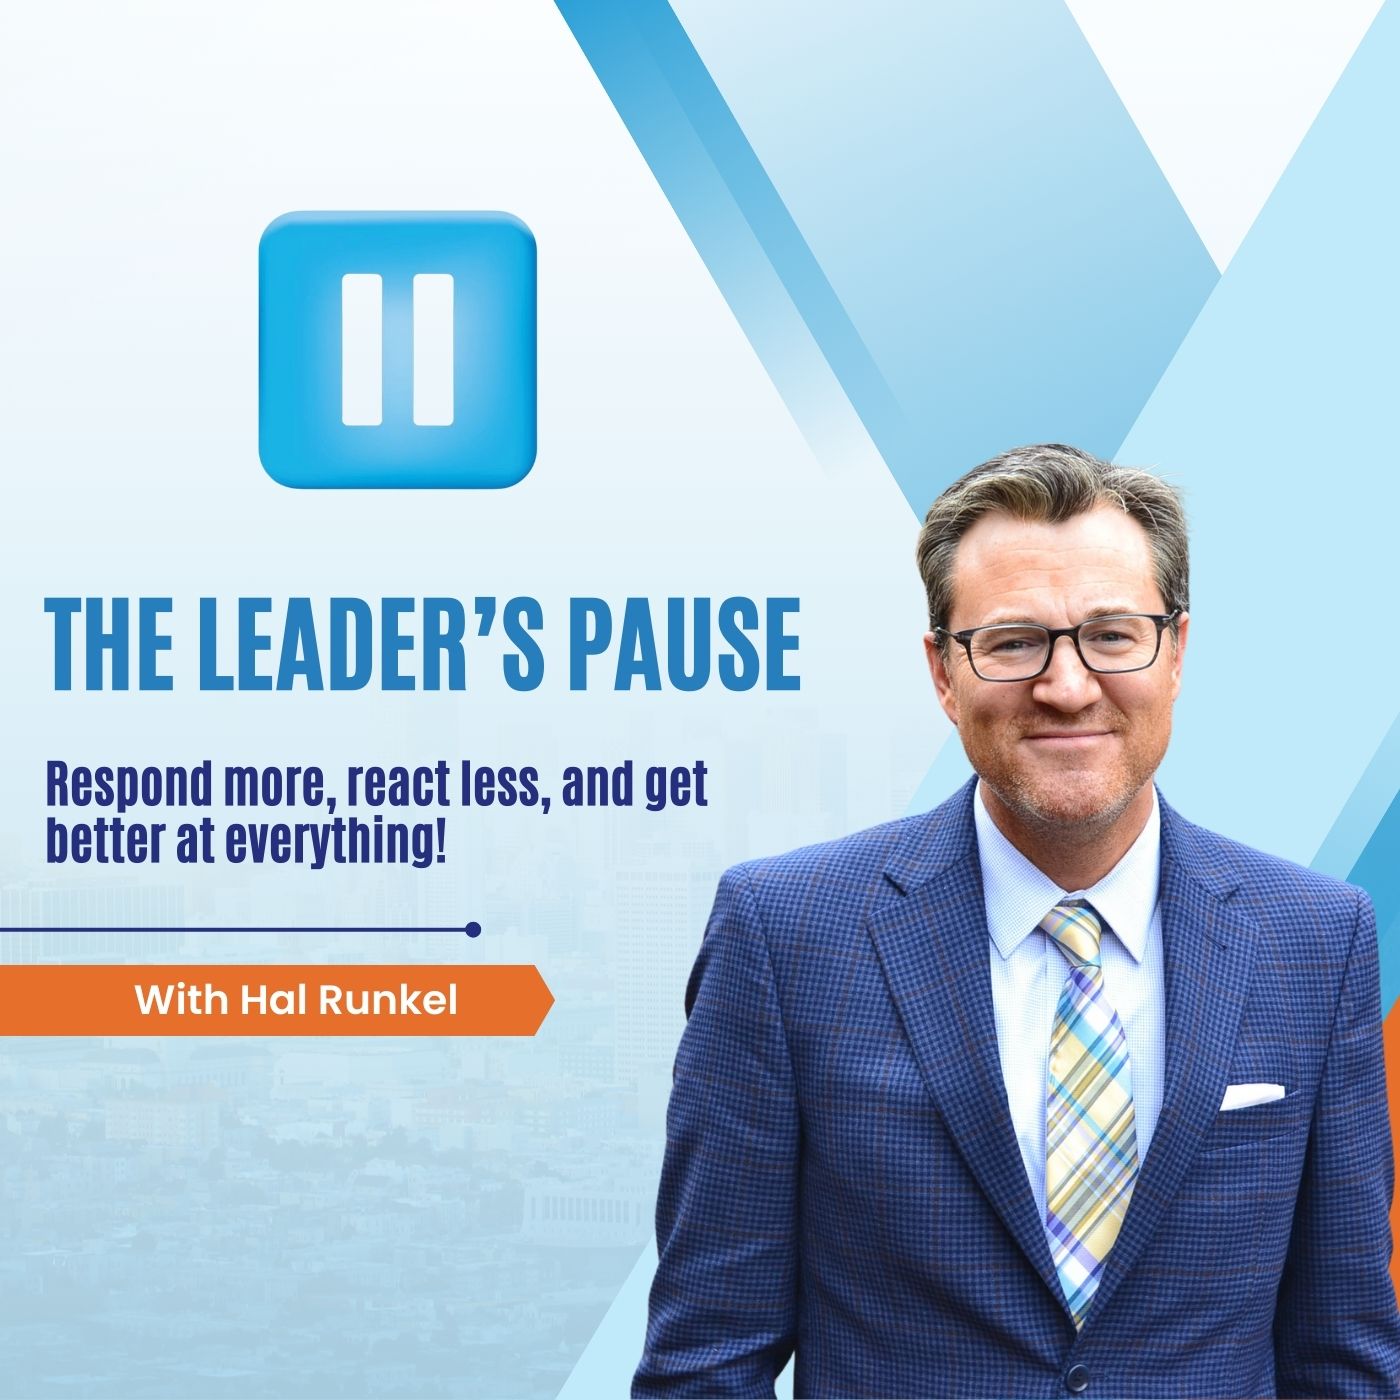 The Leader's Pause with Hal Runkel